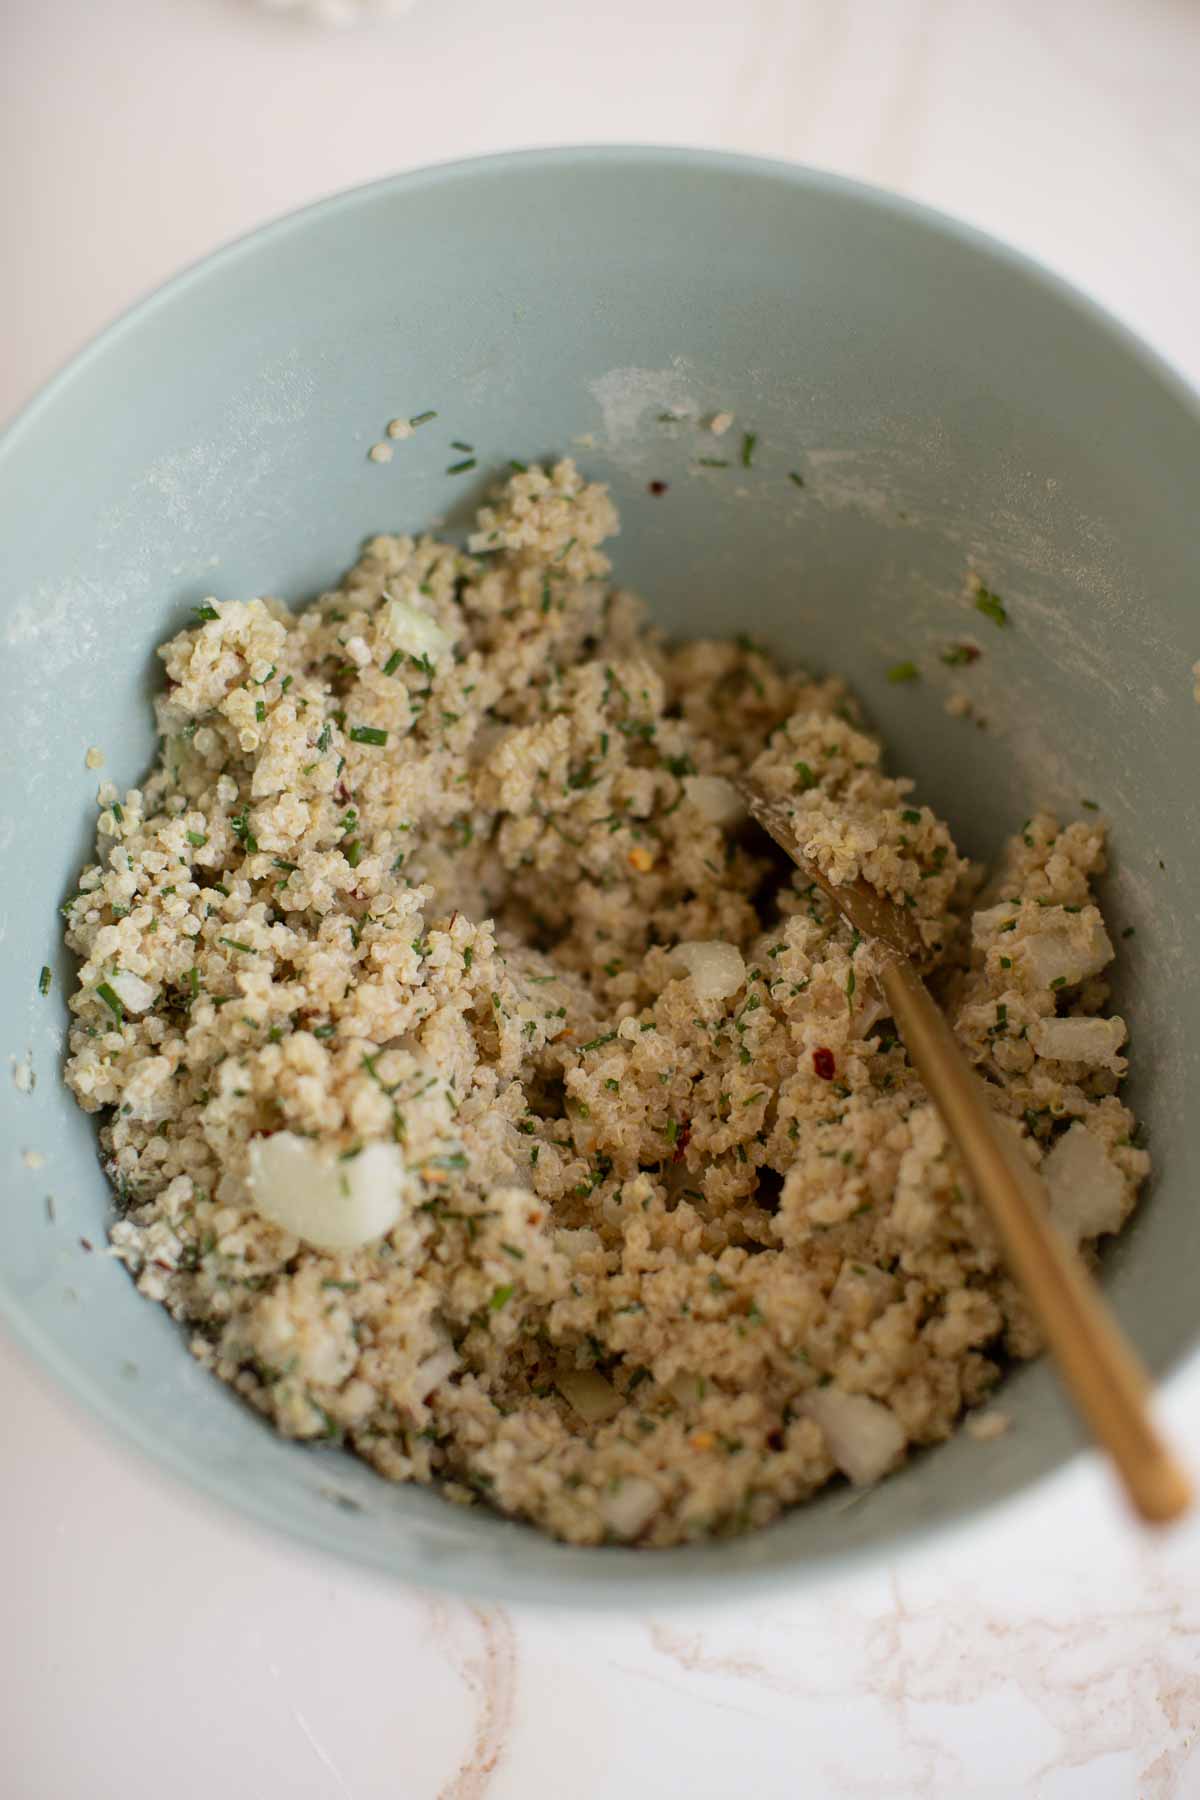 The mixed up quinoa nuggets batter in a mixing bowl with a spoon.